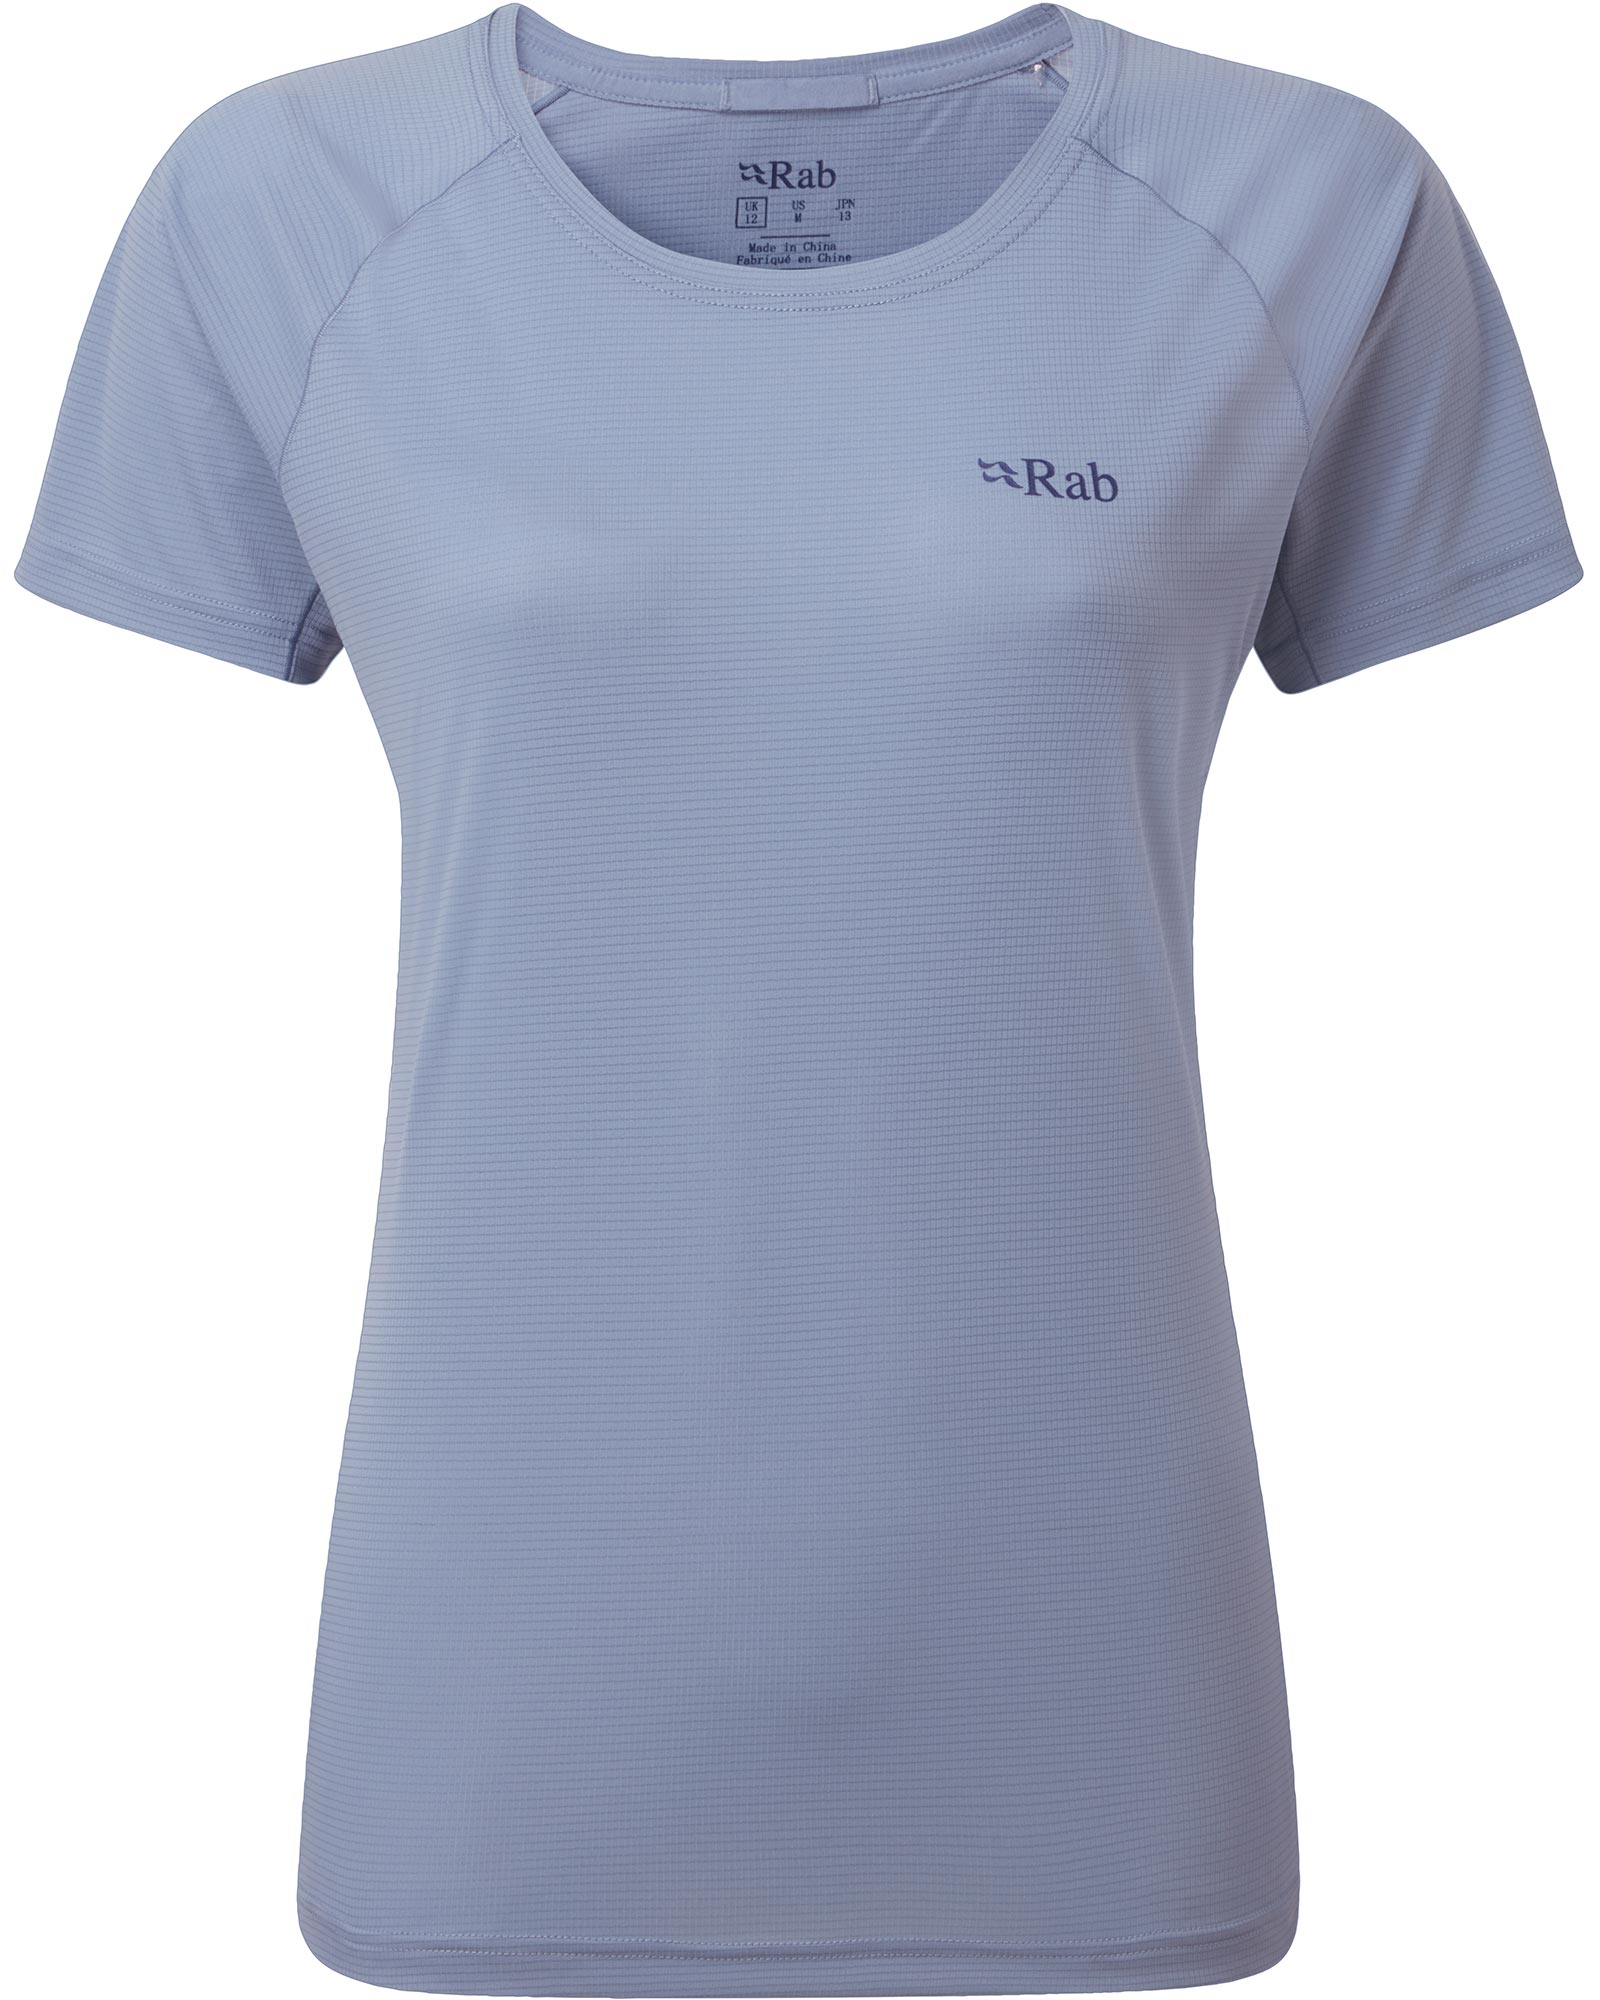 Product image of Rab Pulse Women's T-Shirt